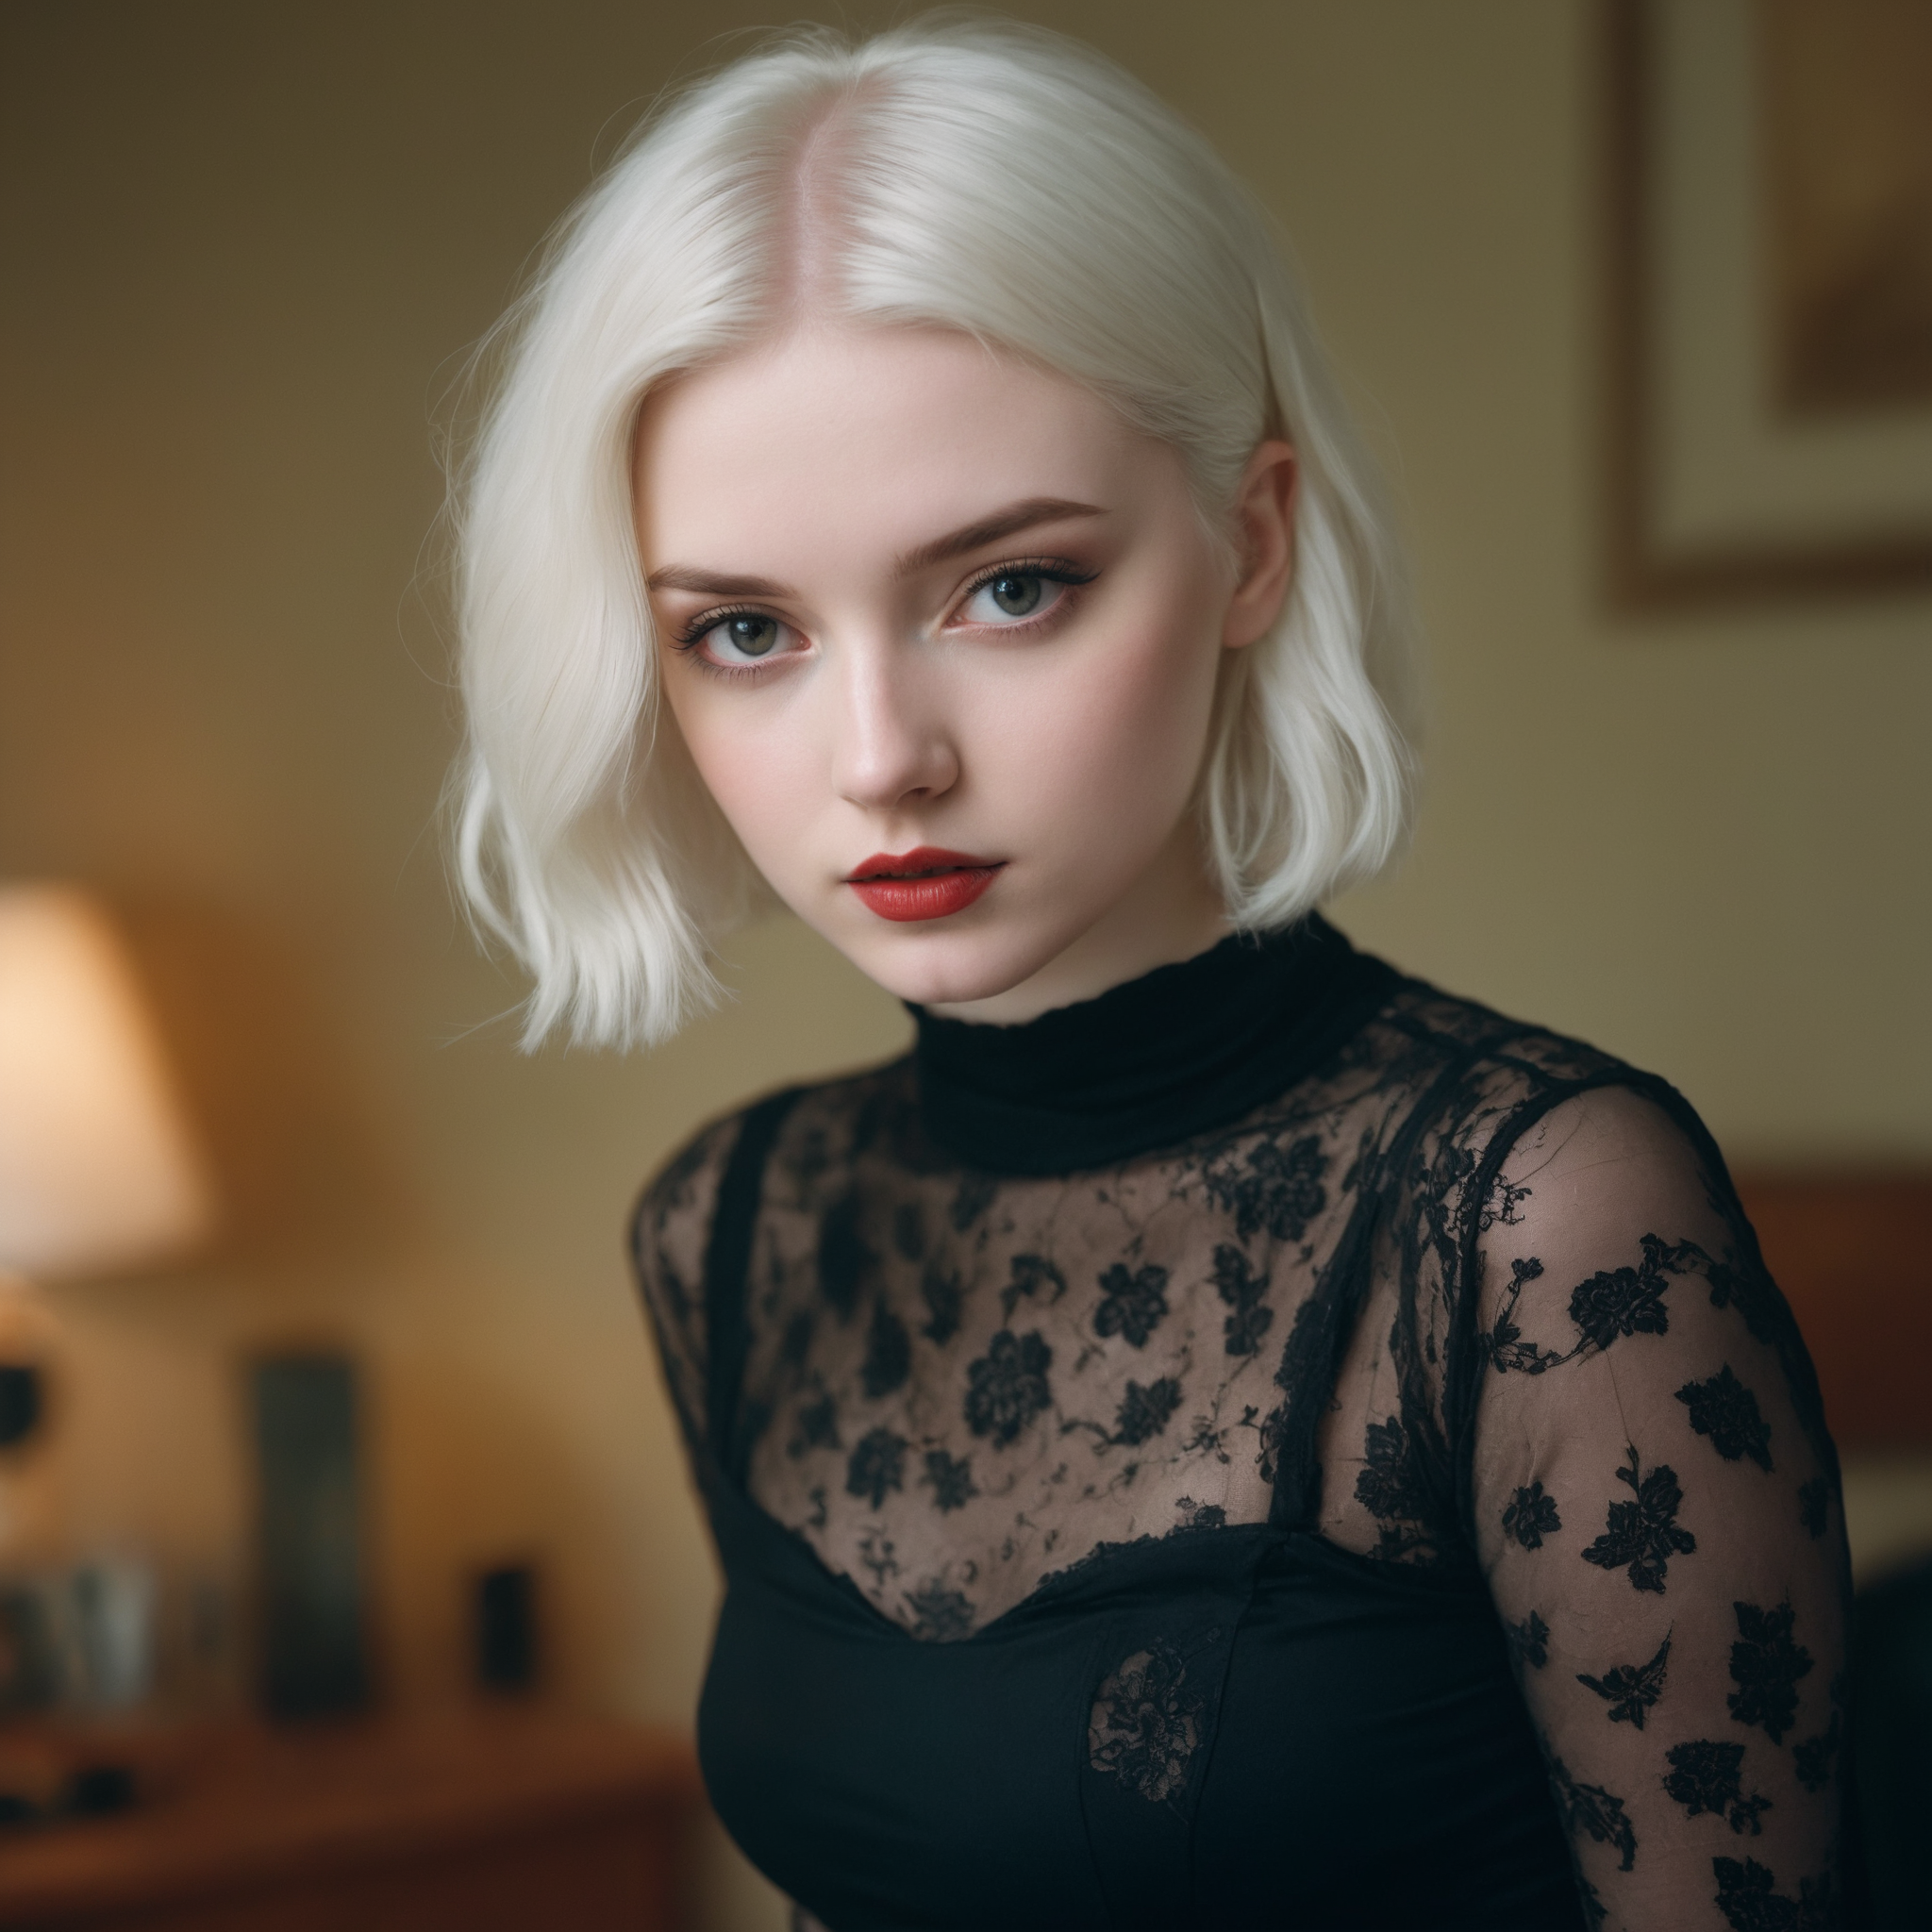 General 2048x2048 AI art Stable Diffusion women white hair lipstick looking at viewer digital art red lipstick closed mouth short hair women indoors lamp blurred blurry background blue eyes parted lips juicy lips black clothing